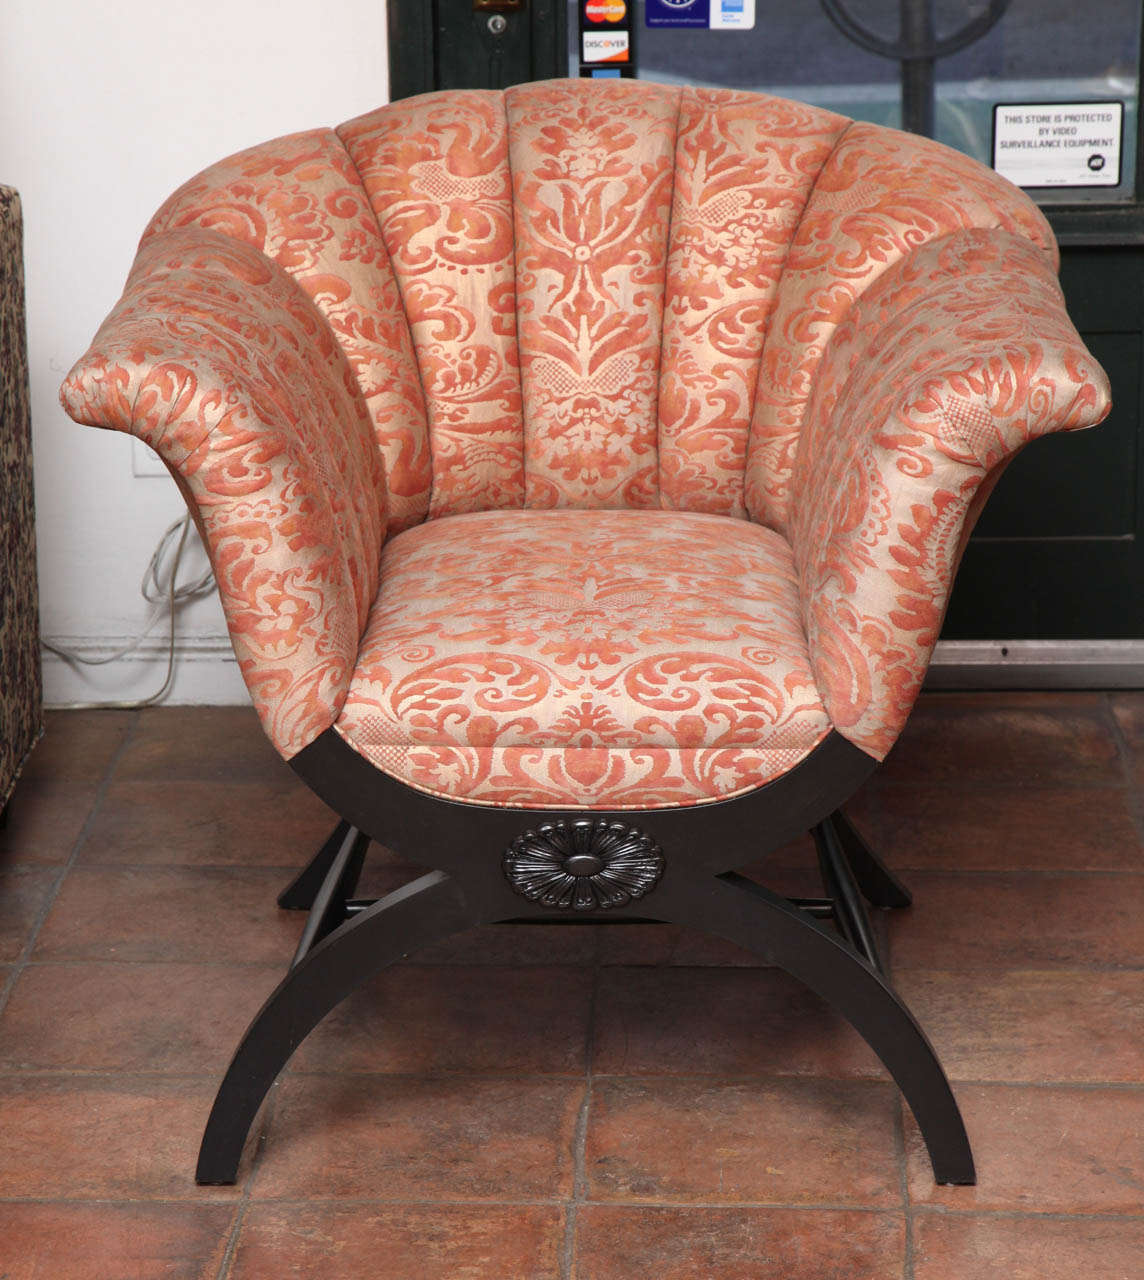 This French Emperor chair, also known as 